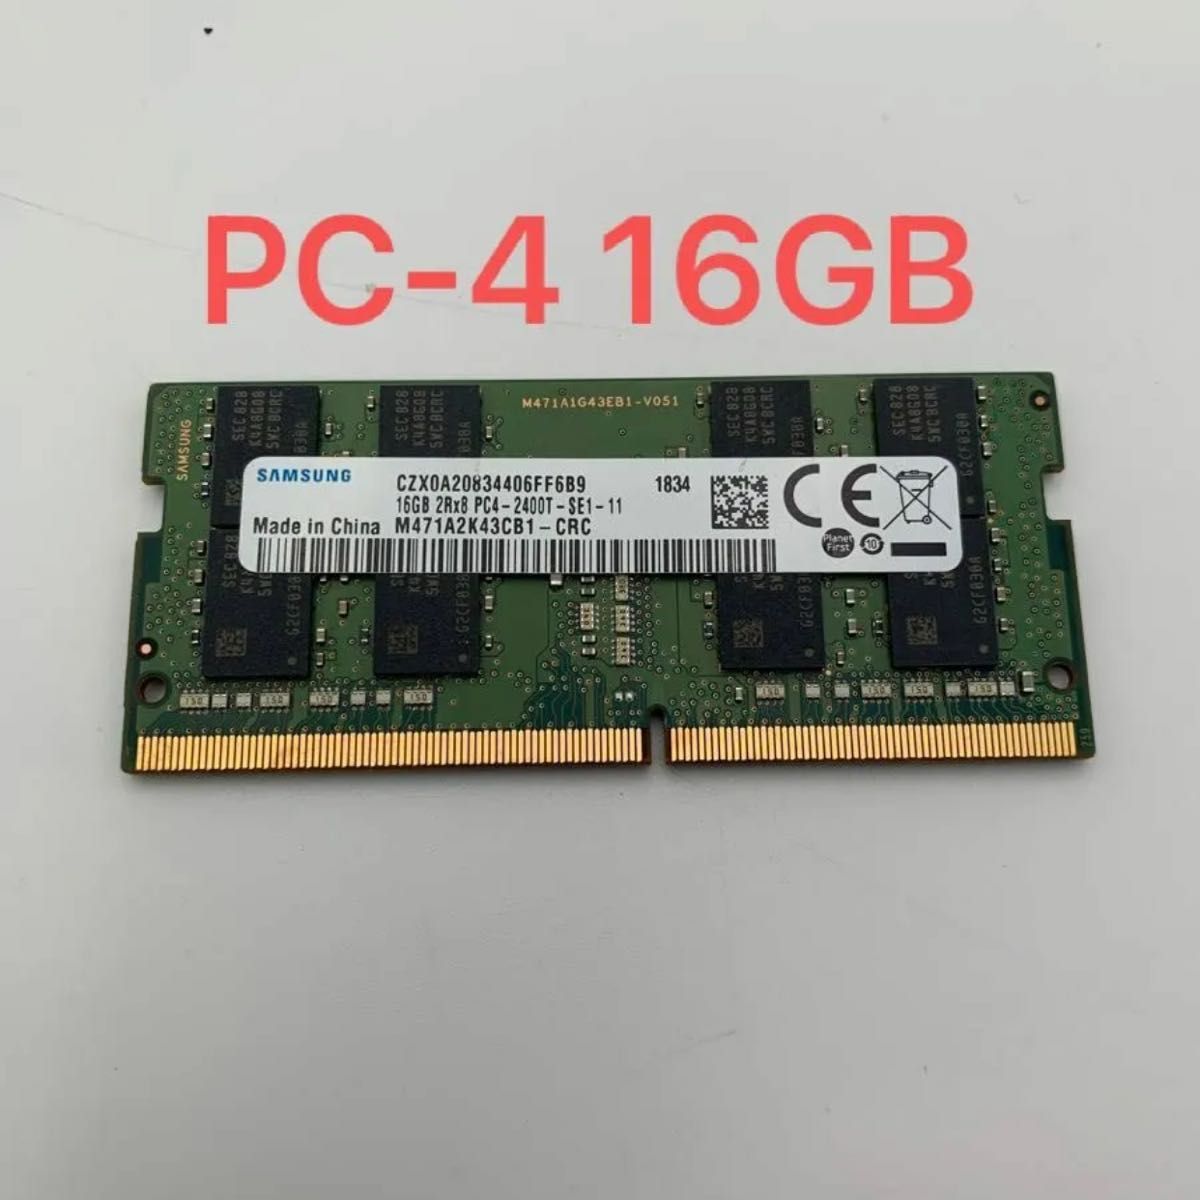 SNMSUNG 2RX8 PC4-2400T-SE1-11 16GB×1ノート用メモリ動作品